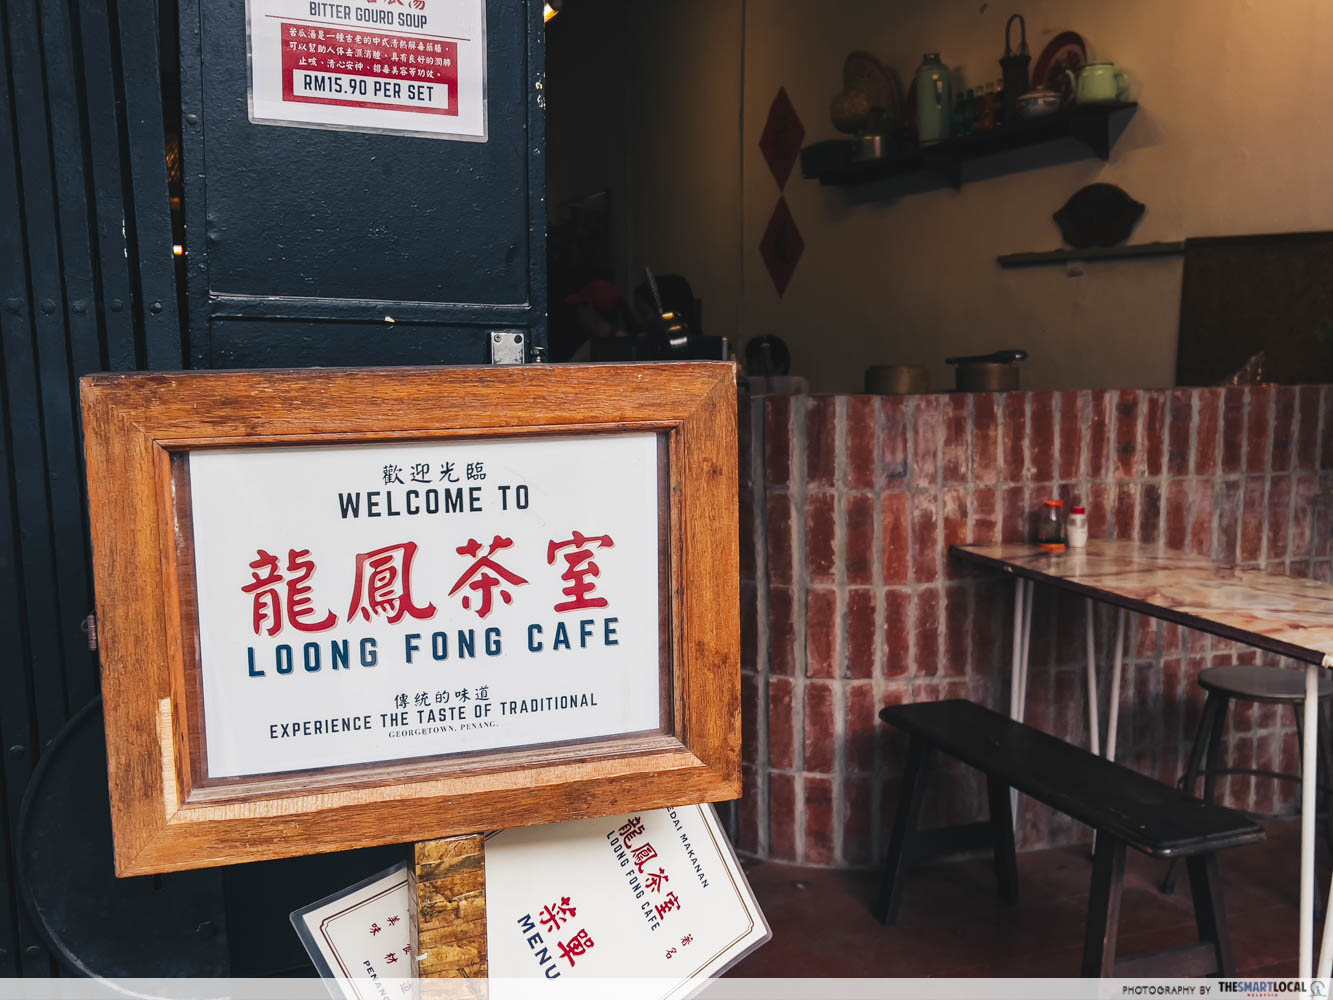 Loong Fong Cafe - sign